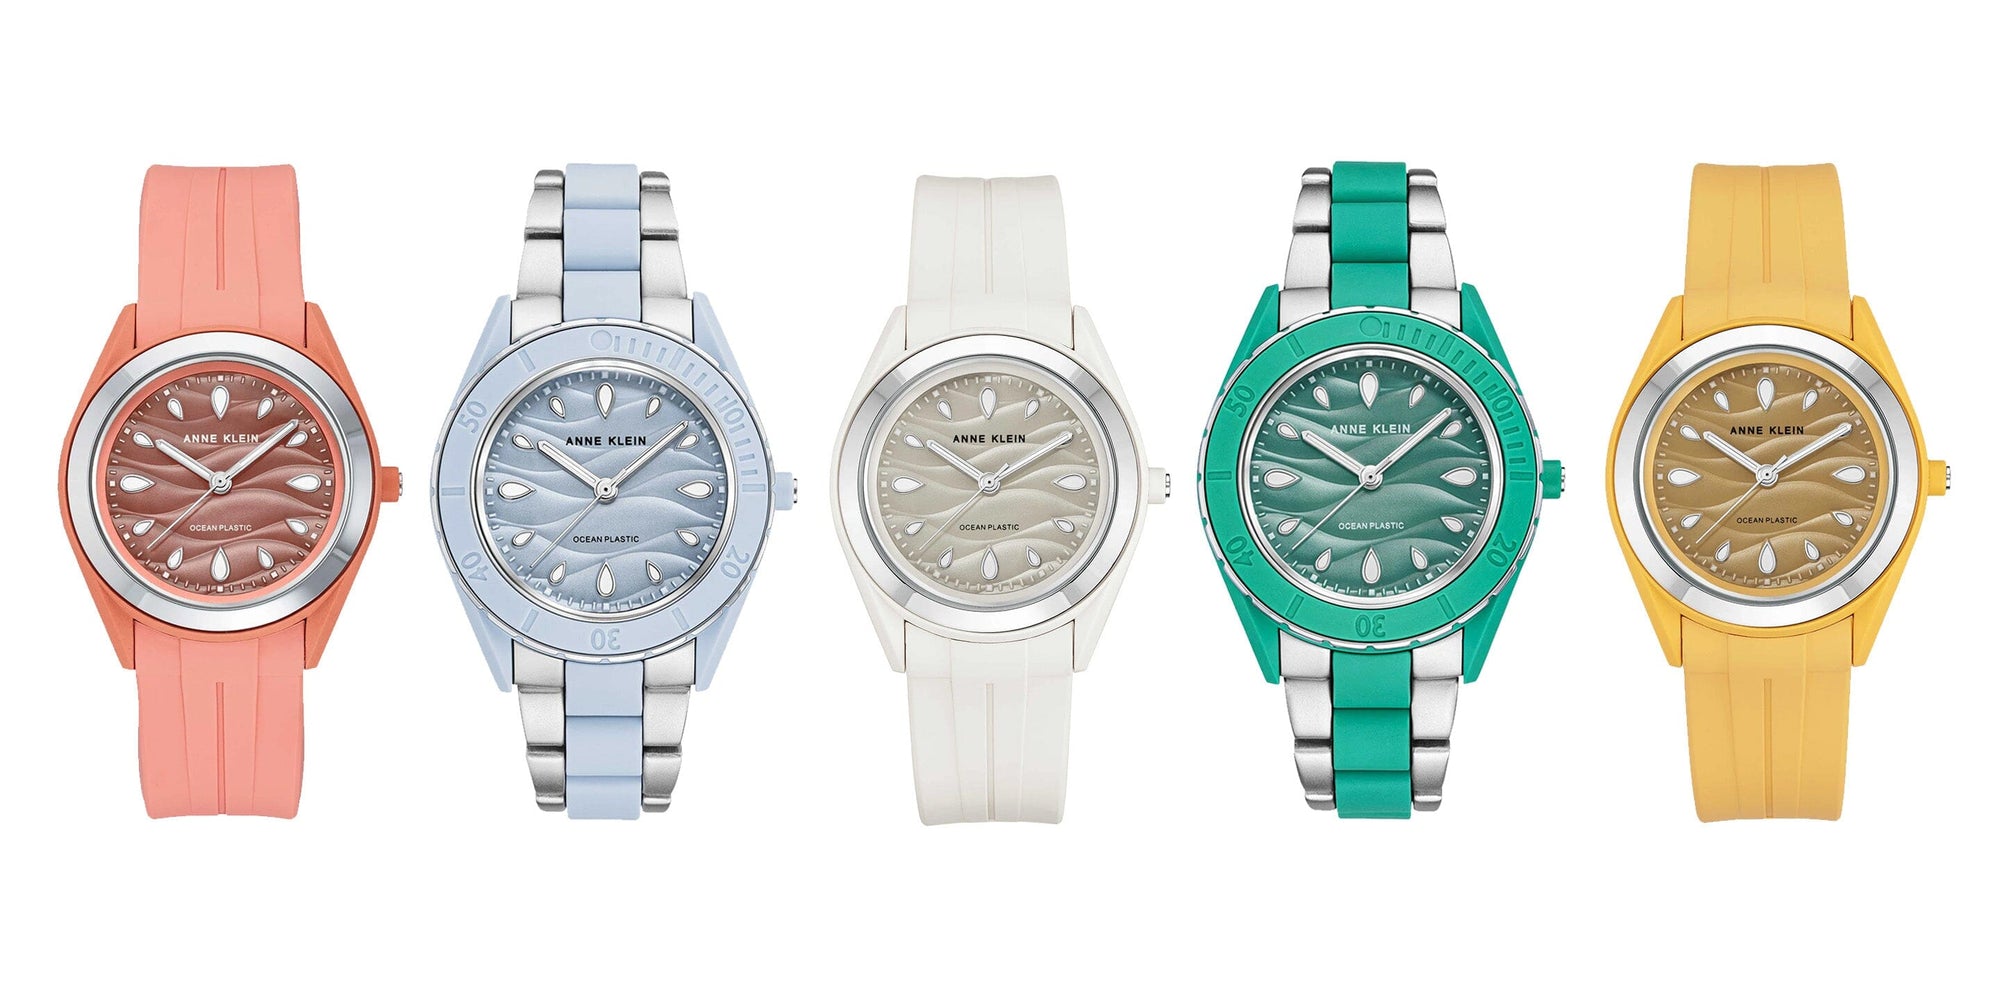 Anne Klein x Oceanworks - A Commitment to Sustainable Fashion